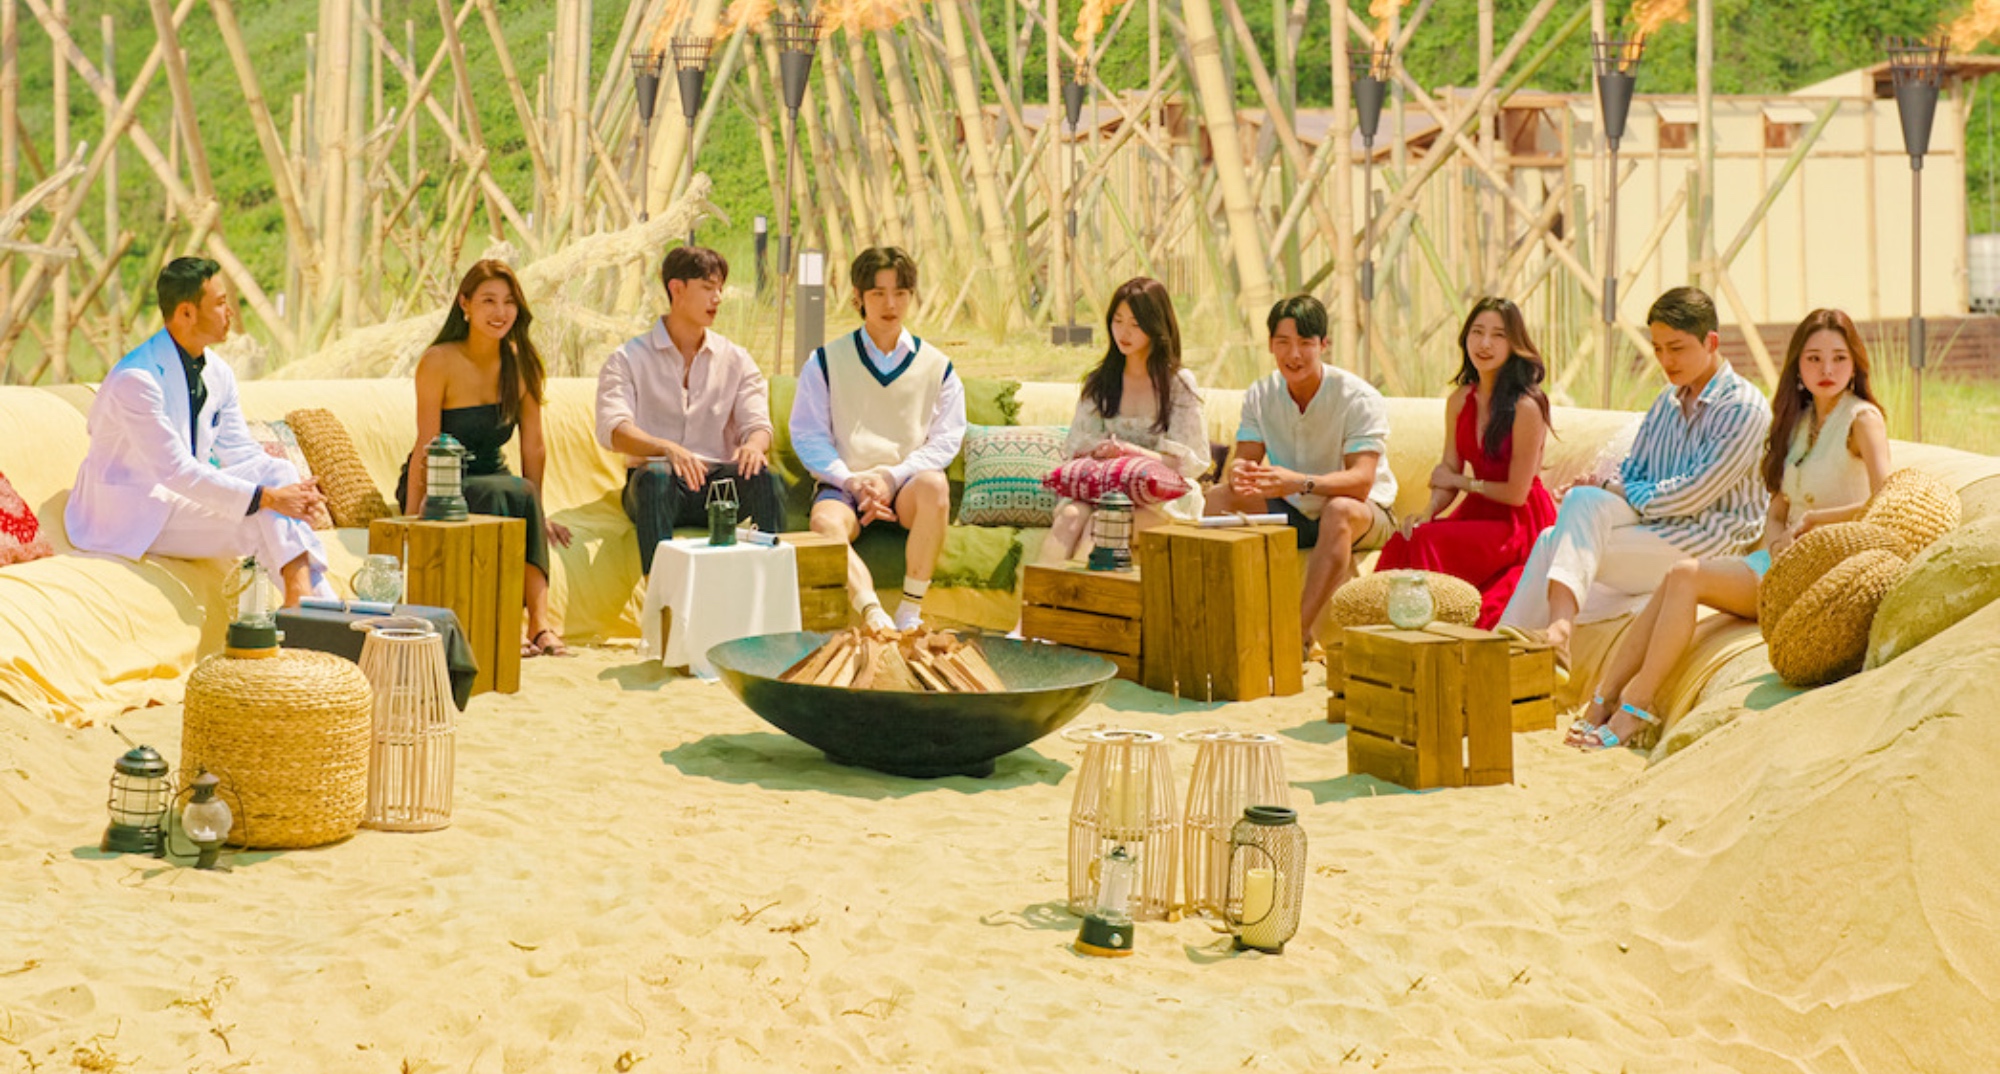 Main cast of 'Single's Inferno' sitting on beach in relation to season 2.